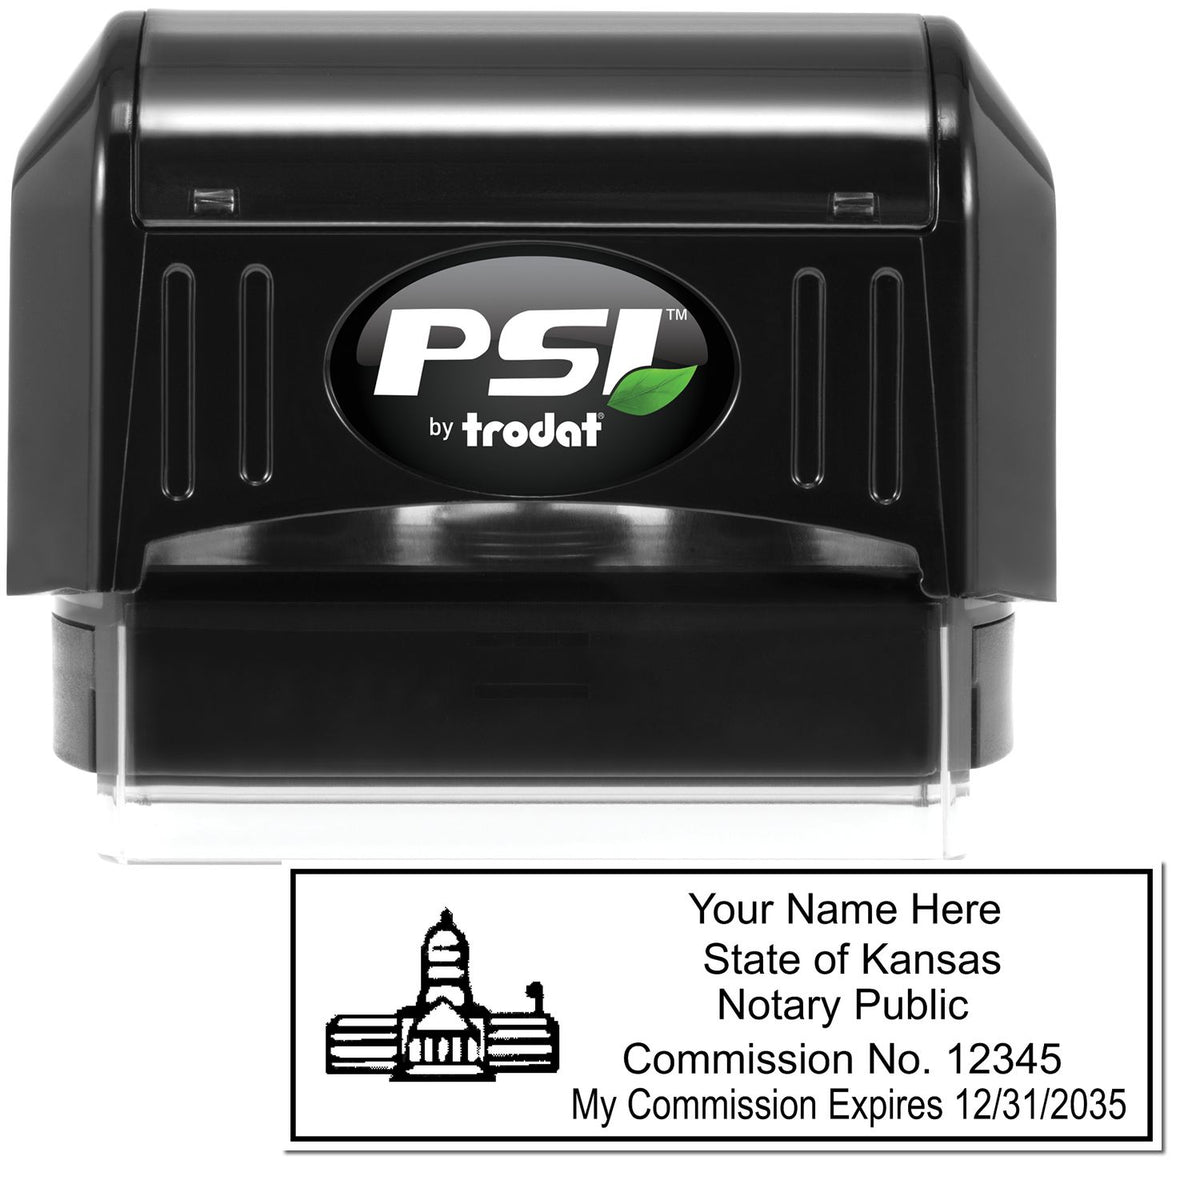 The main image for the PSI Kansas Notary Stamp depicting a sample of the imprint and electronic files